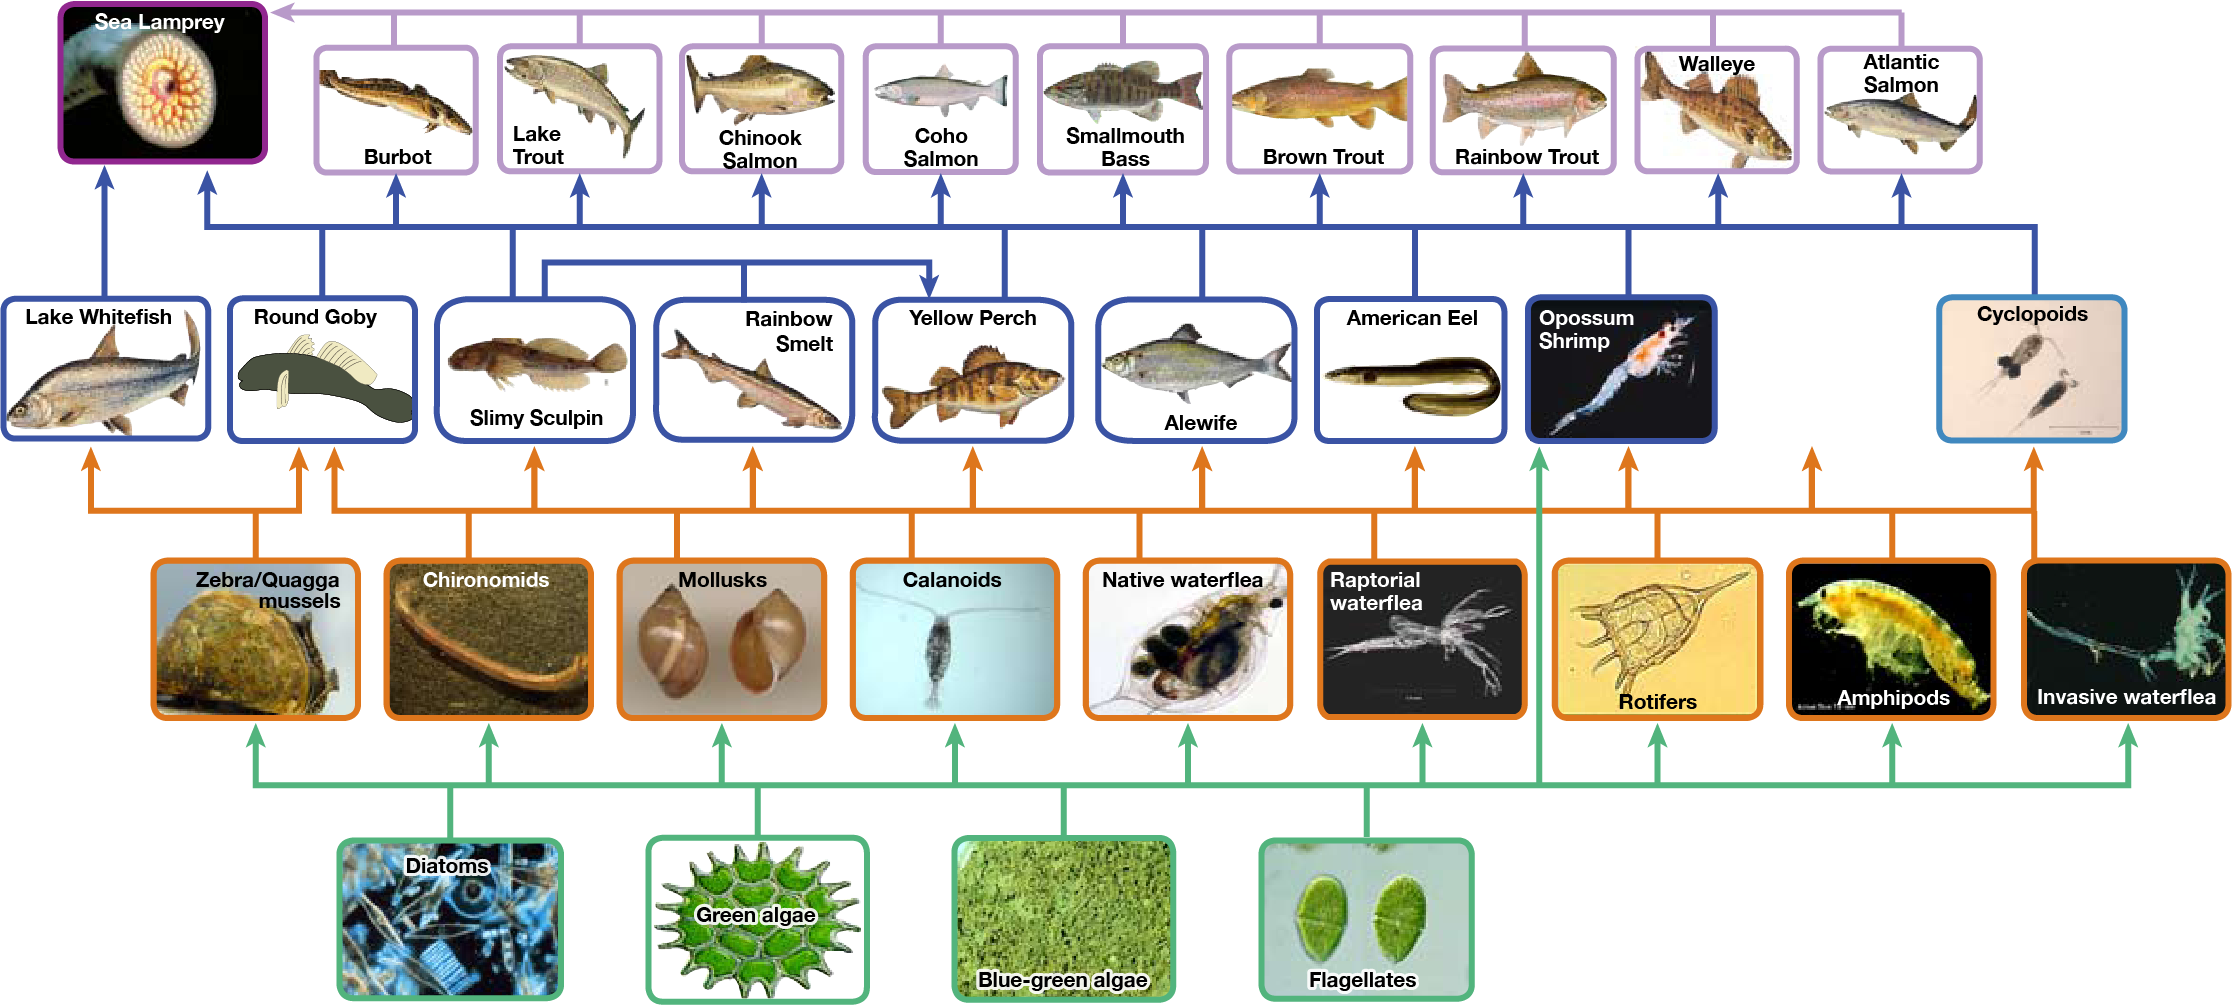 The bottom level of the illustration shows primary producers, which include diatoms, green algae, blue-green algae, flagellates, and rotifers. The next level includes the primary consumers that eat primary producers. These include calanoids, waterfleas, and cyclopoids, rotifers and amphipods. The shrimp also eats primary producers. Primary consumers are in turn eaten by secondary consumers, which are typically small fish. The small fish are eaten by larger fish, the tertiary, or apex consumers. The yellow perch, a secondary consumer, eats small fish within its own trophic level. All fish are eaten by the sea lamprey. Thus, the food web is complex with interwoven layers.